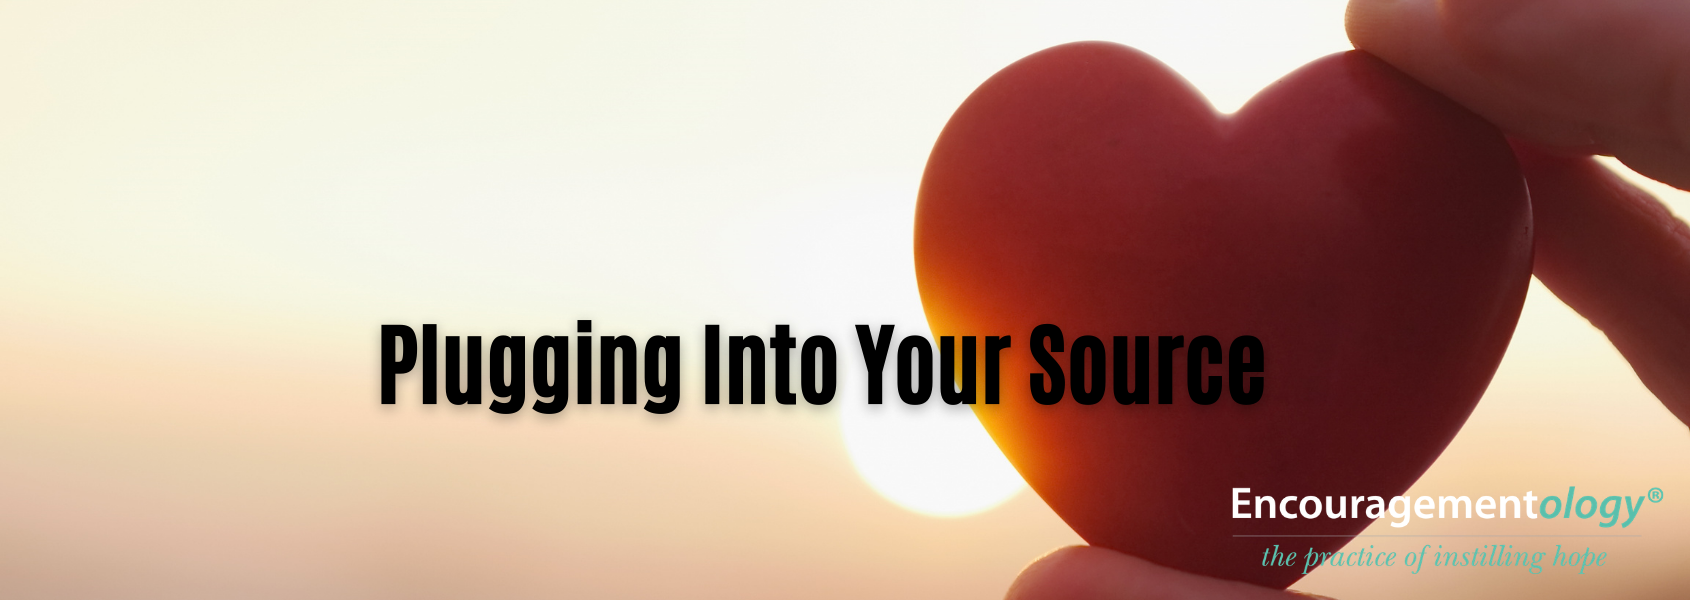 Plugging Into Your Source